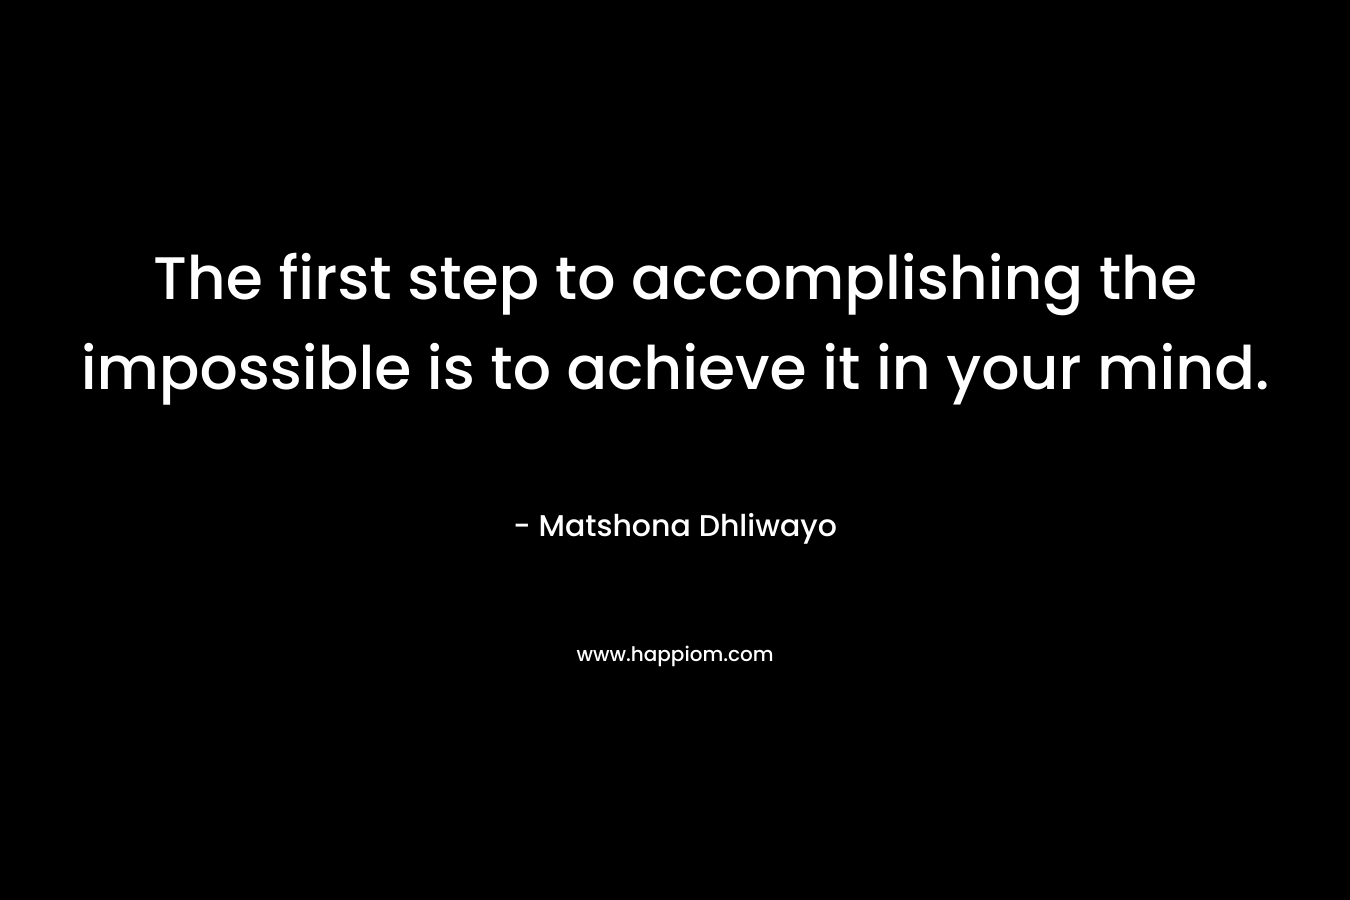 The first step to accomplishing the impossible is to achieve it in your mind. – Matshona Dhliwayo